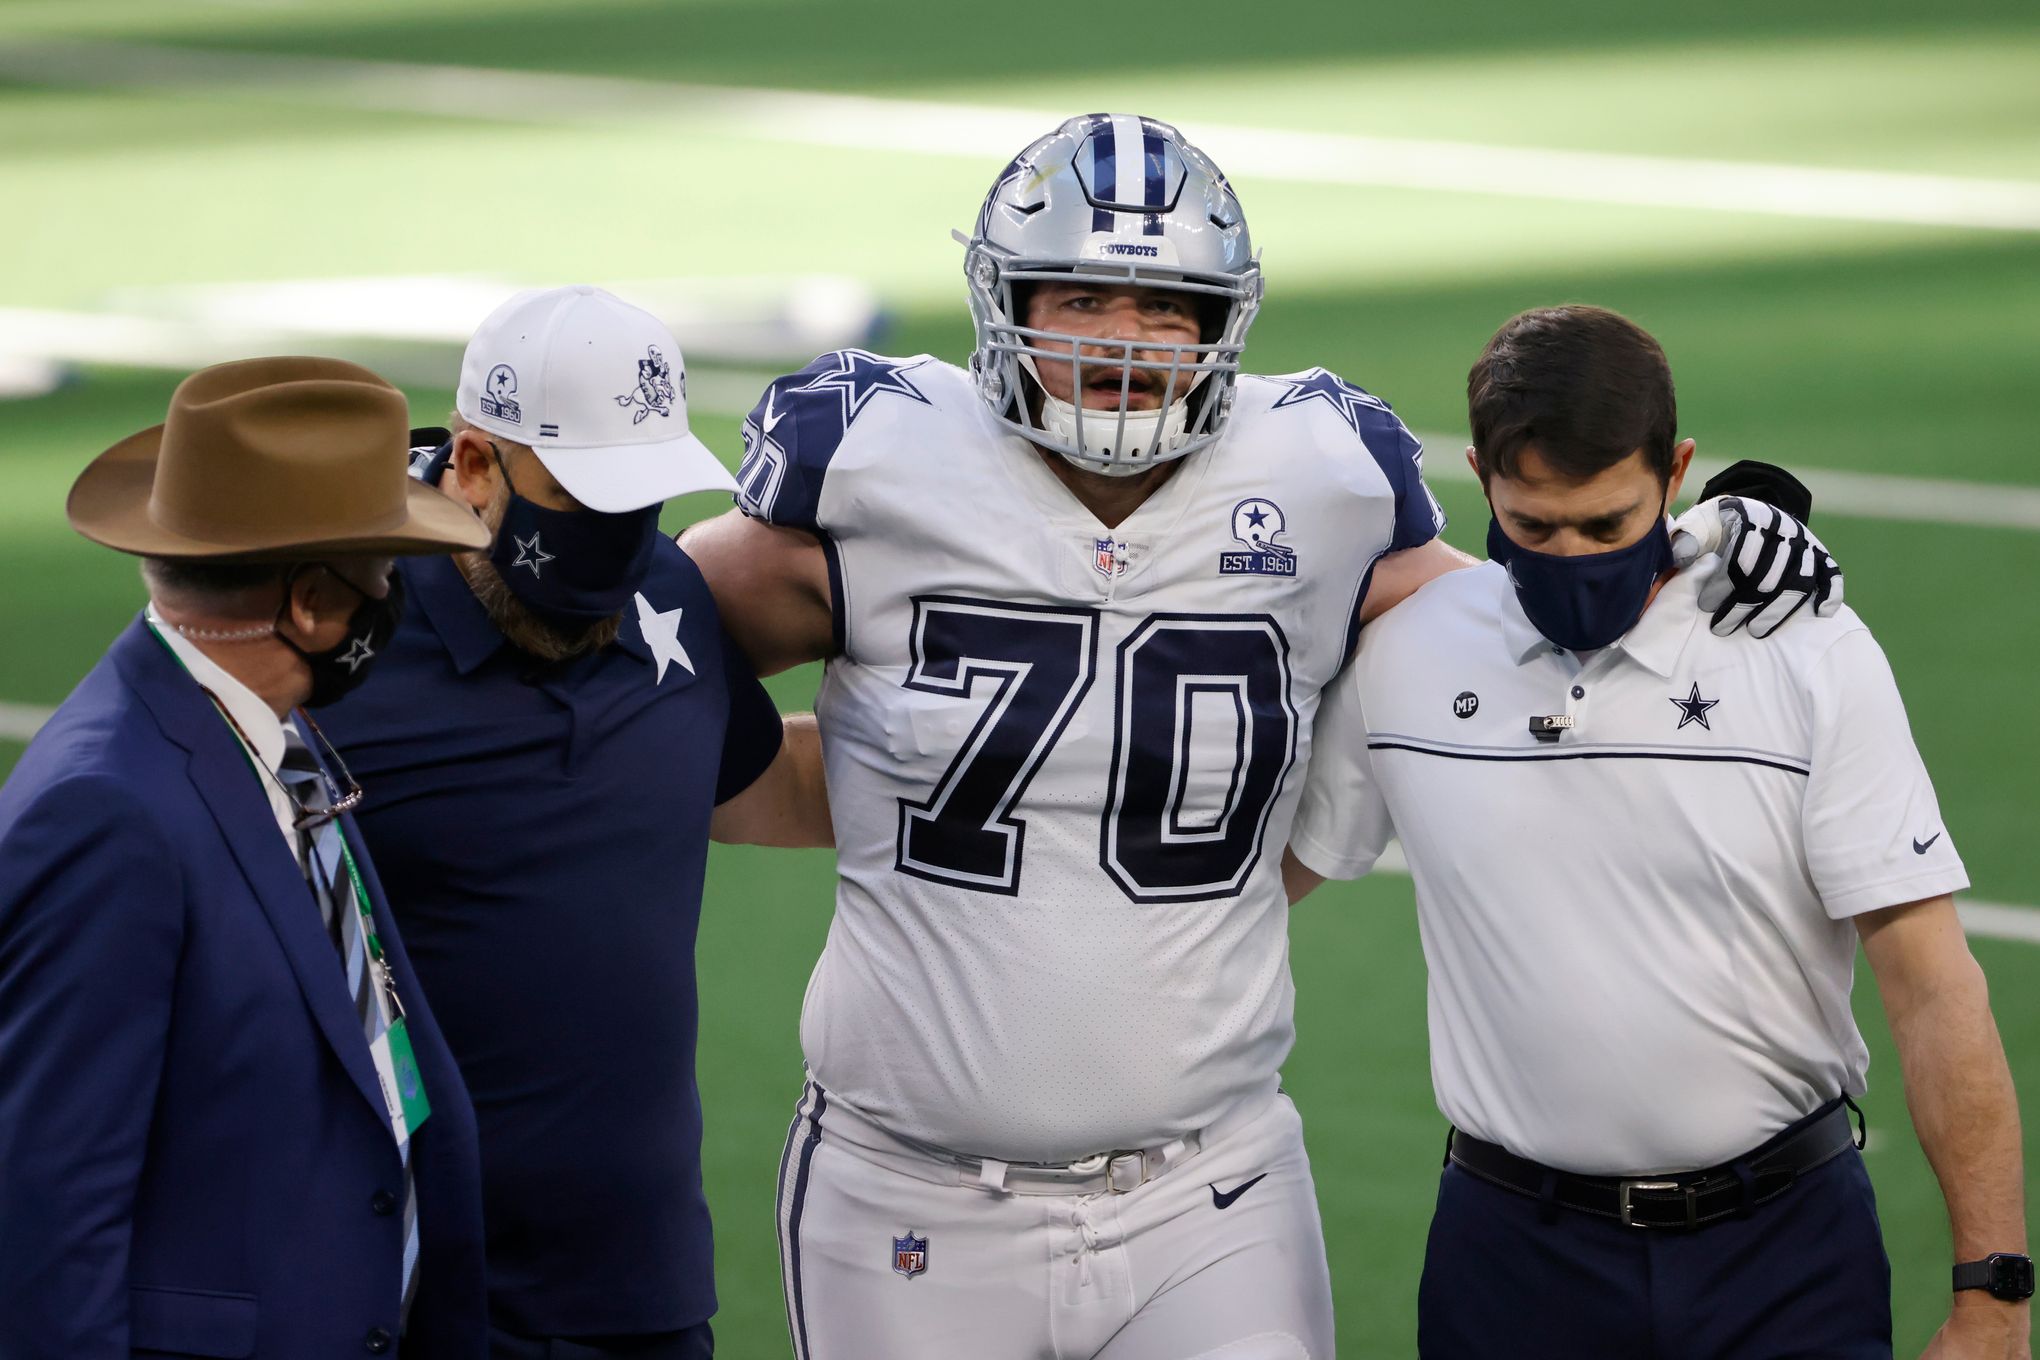 Cowboys All-Pro Zack Martin goes to IR, out at least 3 games